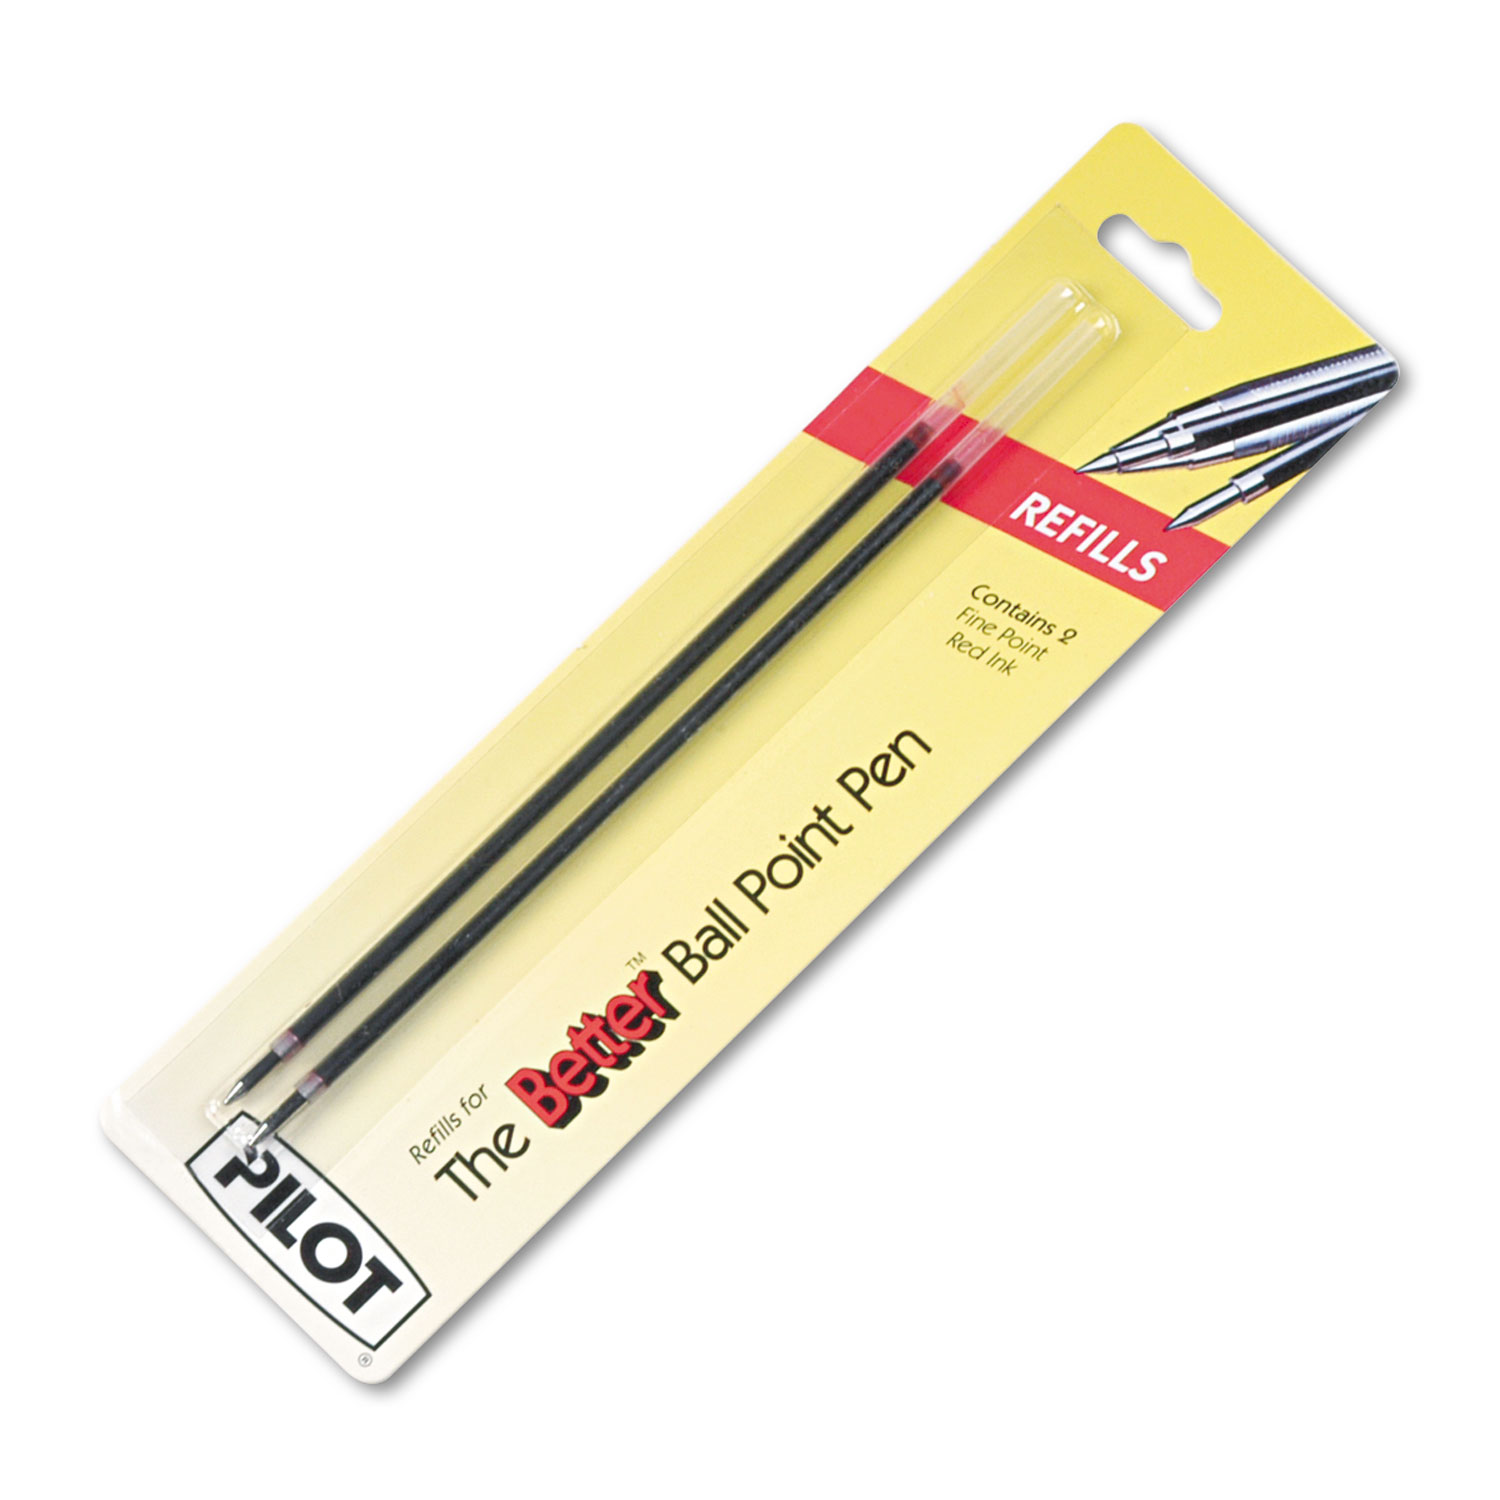  Pilot 77217 Refill for Pilot Better, BetterGrip, EasyTouch and CAMO Ballpoint Pens, Fine Point, Red Ink, 2/Pack (PIL77217) 